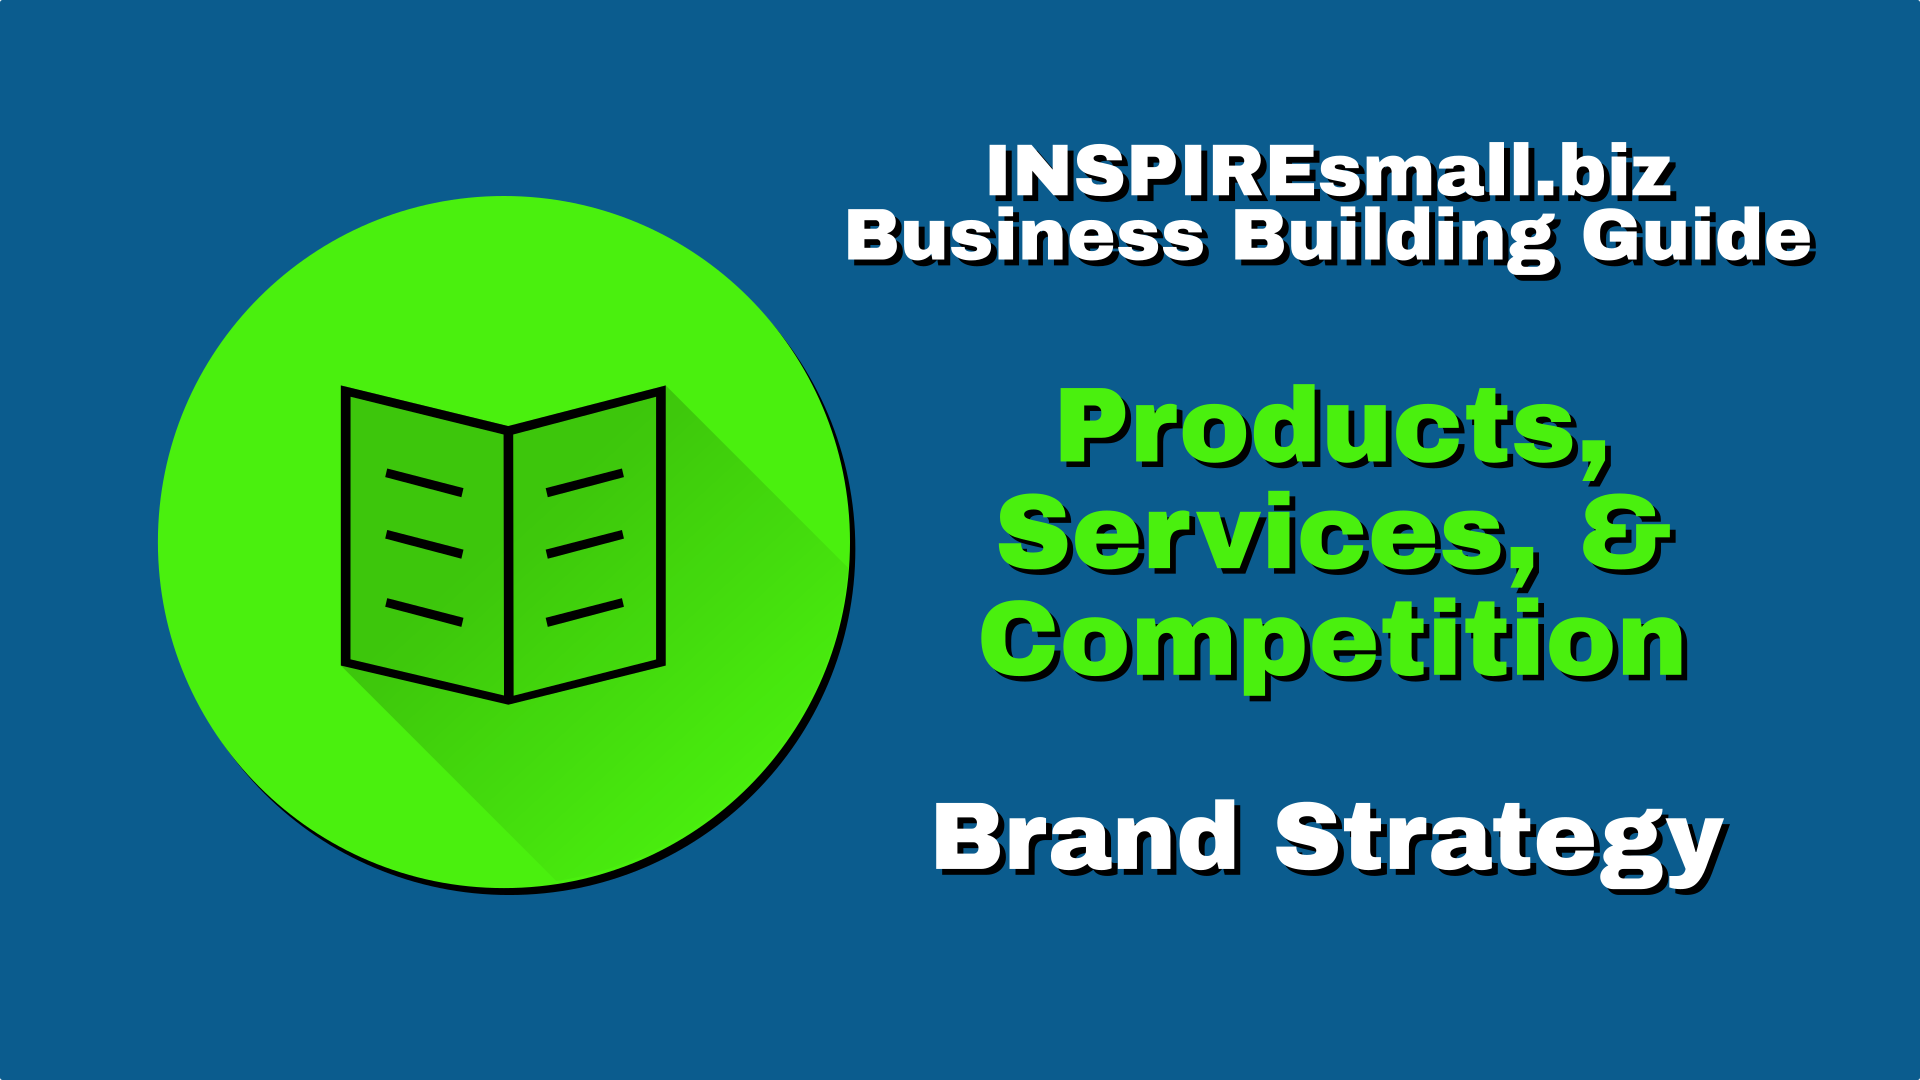 Understanding Your Products, Services, & Competition